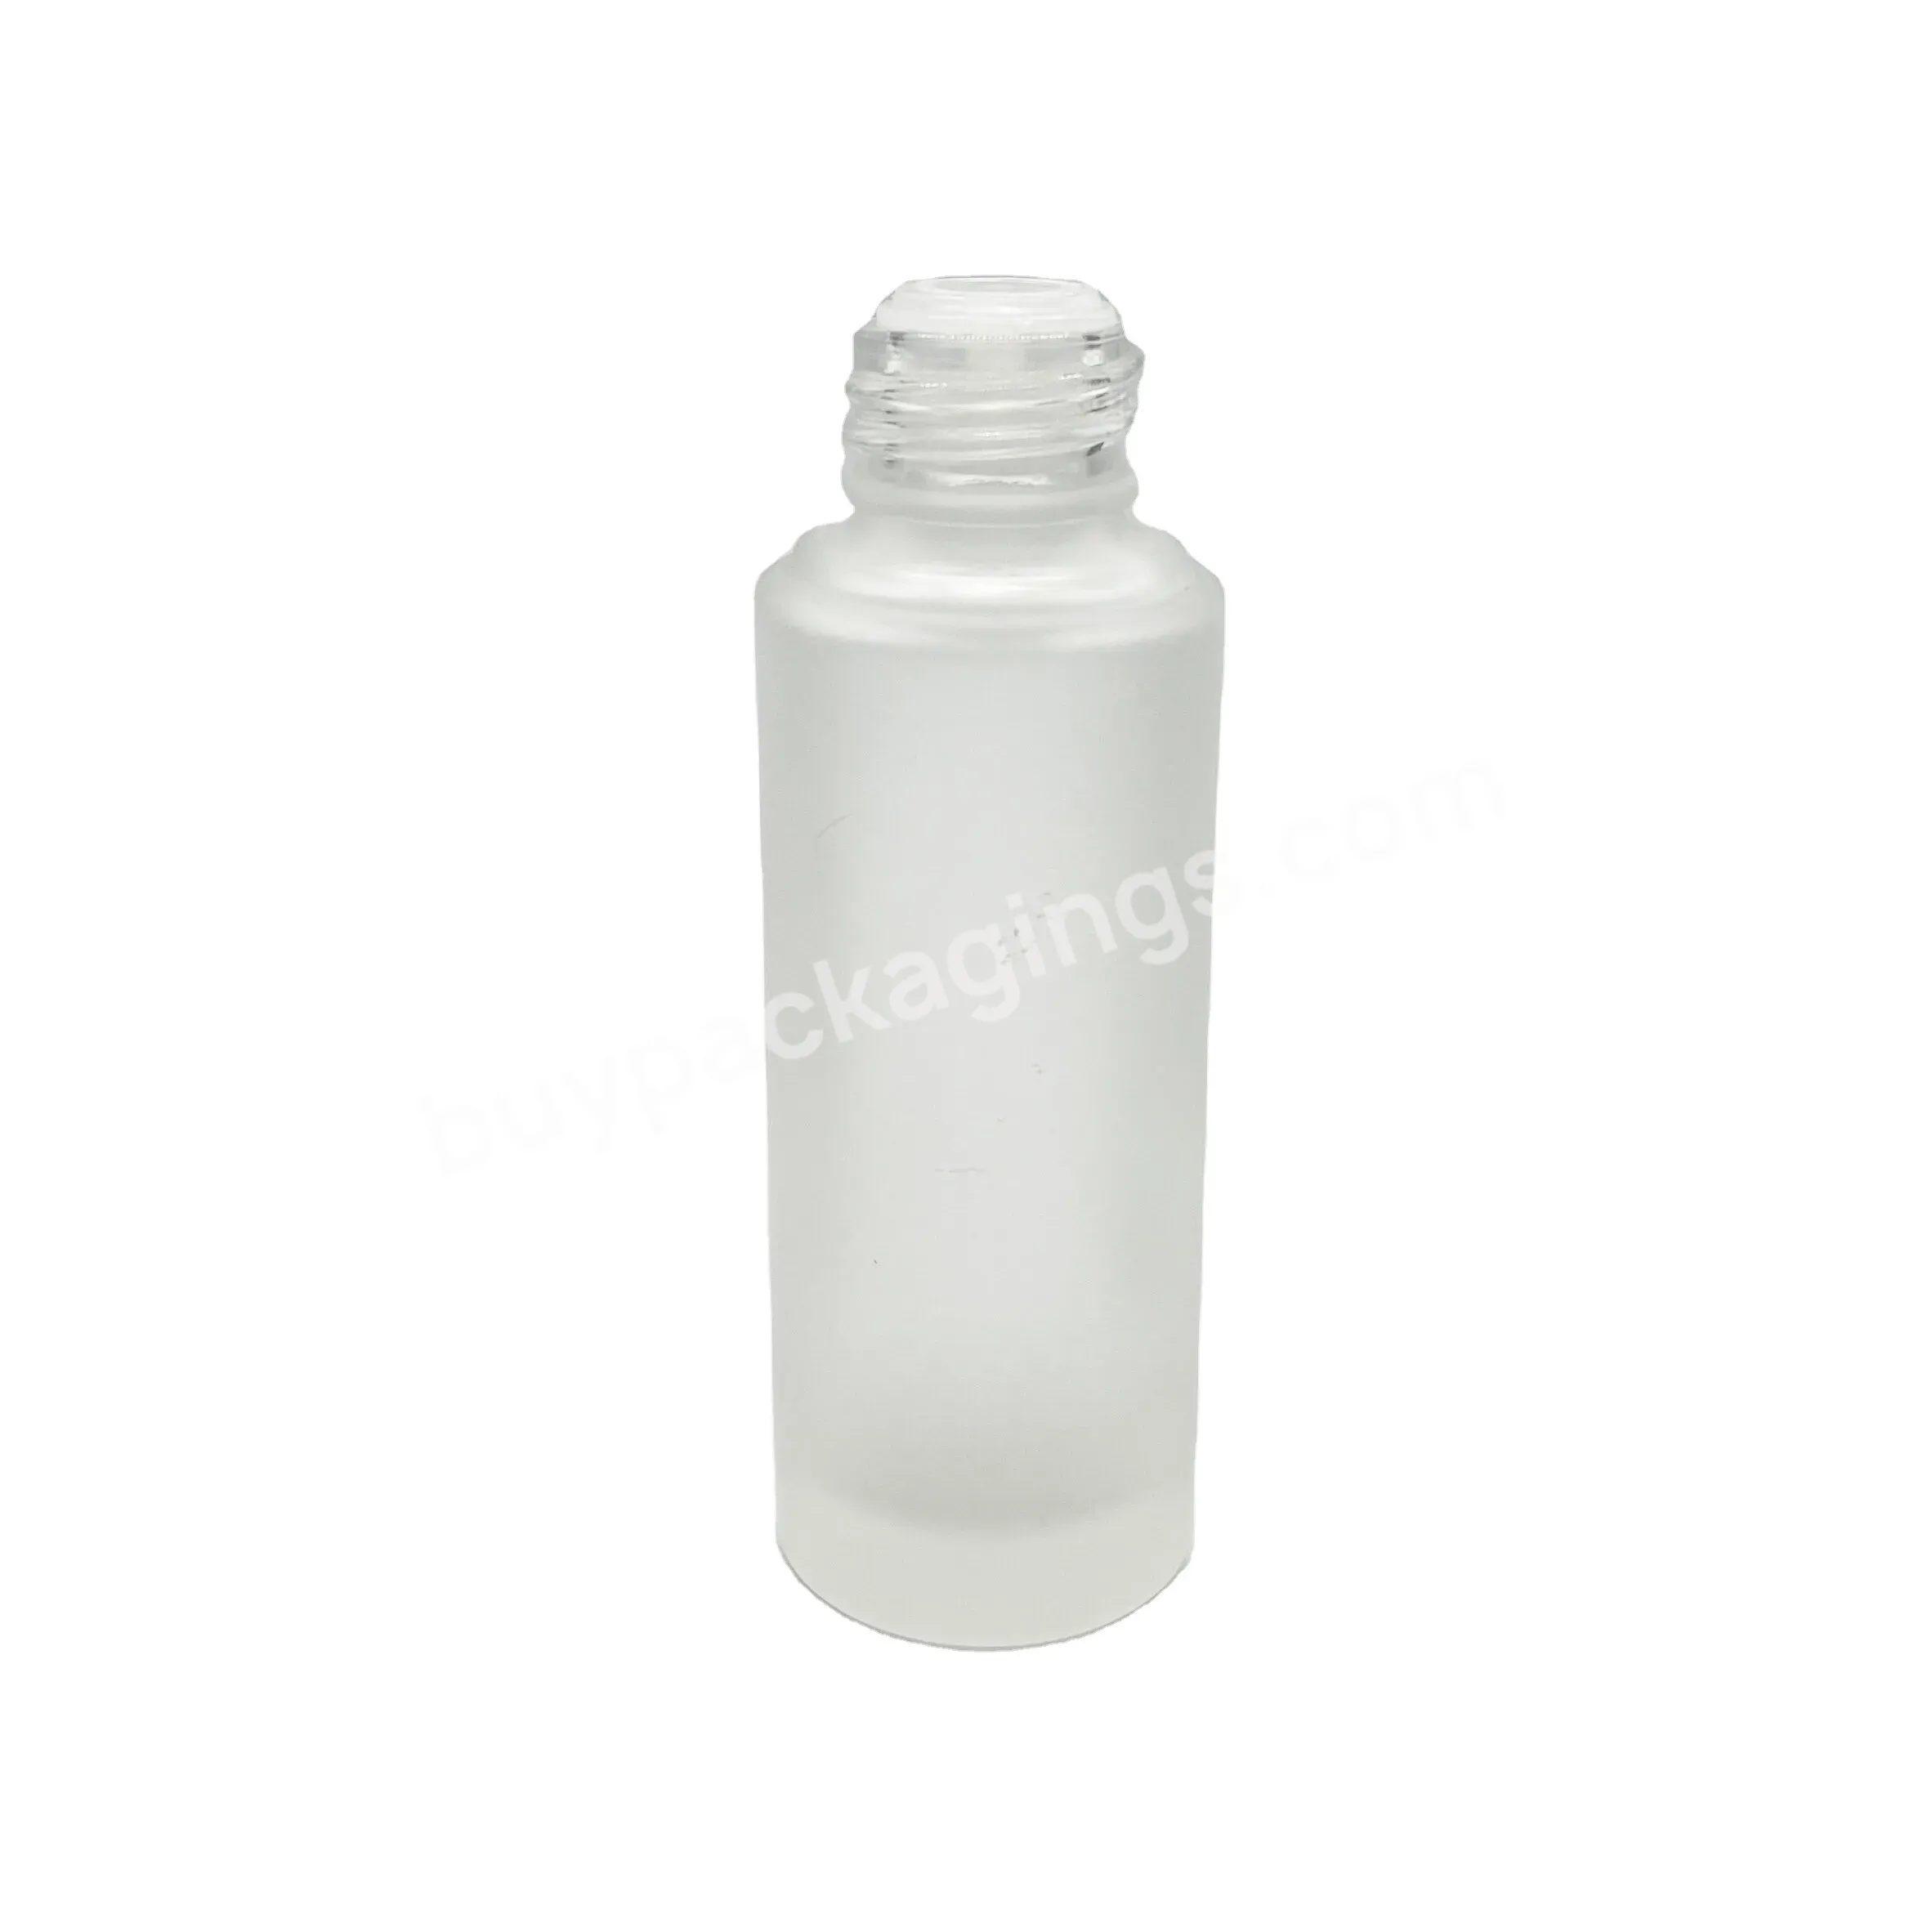 Wholesale Luxury Cylinder Round Glass Serum Essential Oil Lotion Toner Bottle 25ml Clear Frosted Glass Bottle With Alu Screw Cap